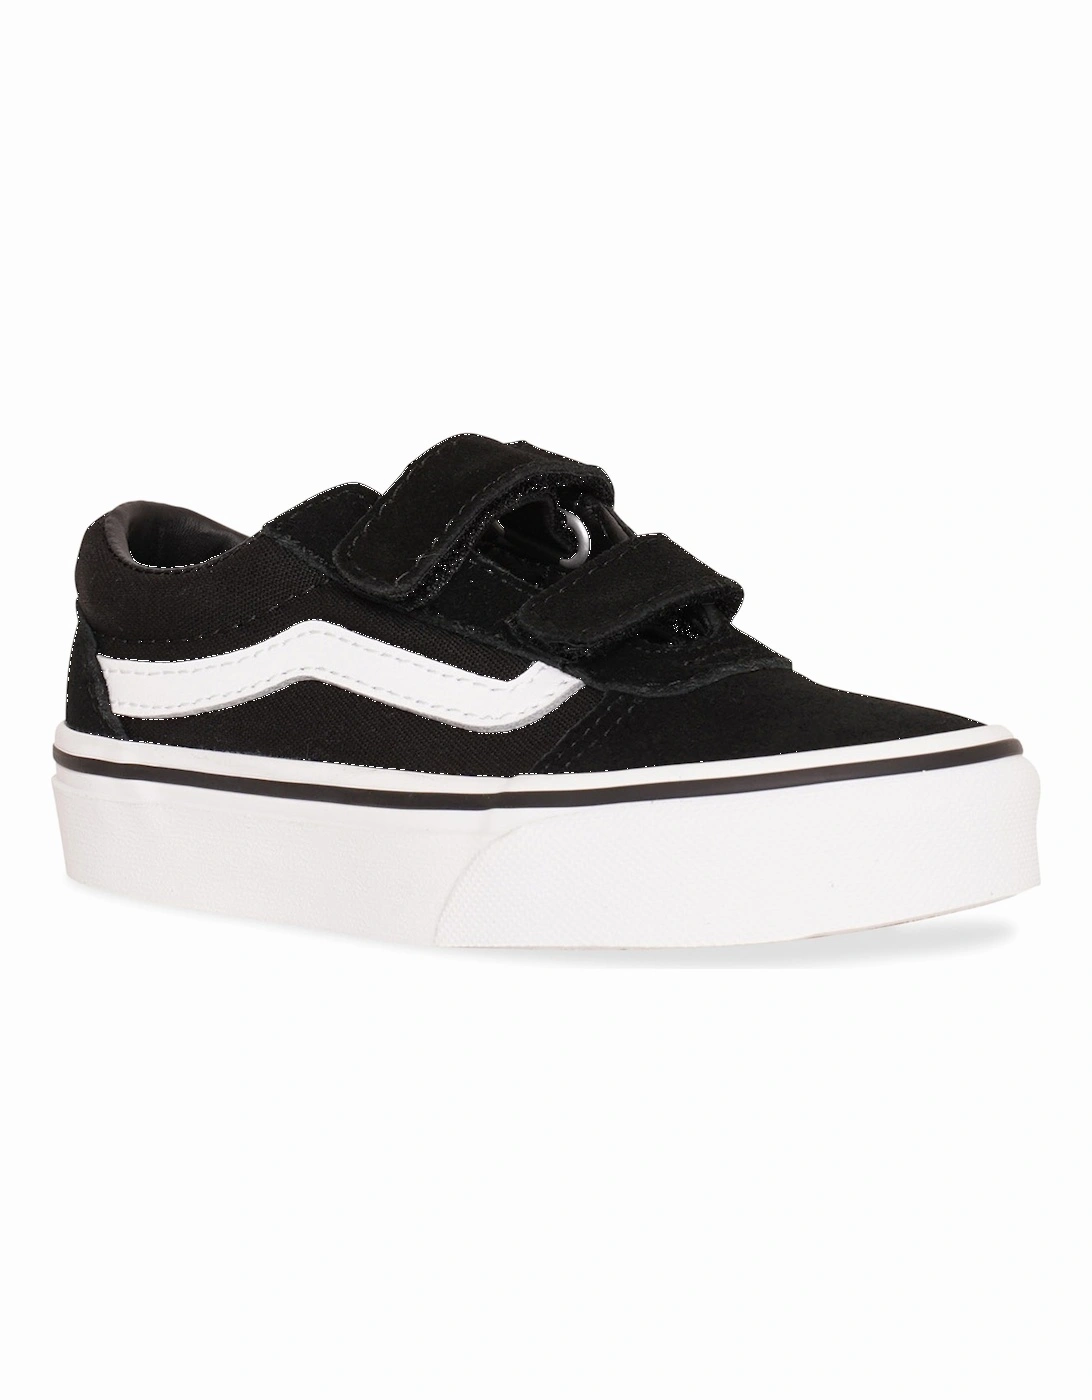 Ward Youths Suede Trainers (Black White), 8 of 7